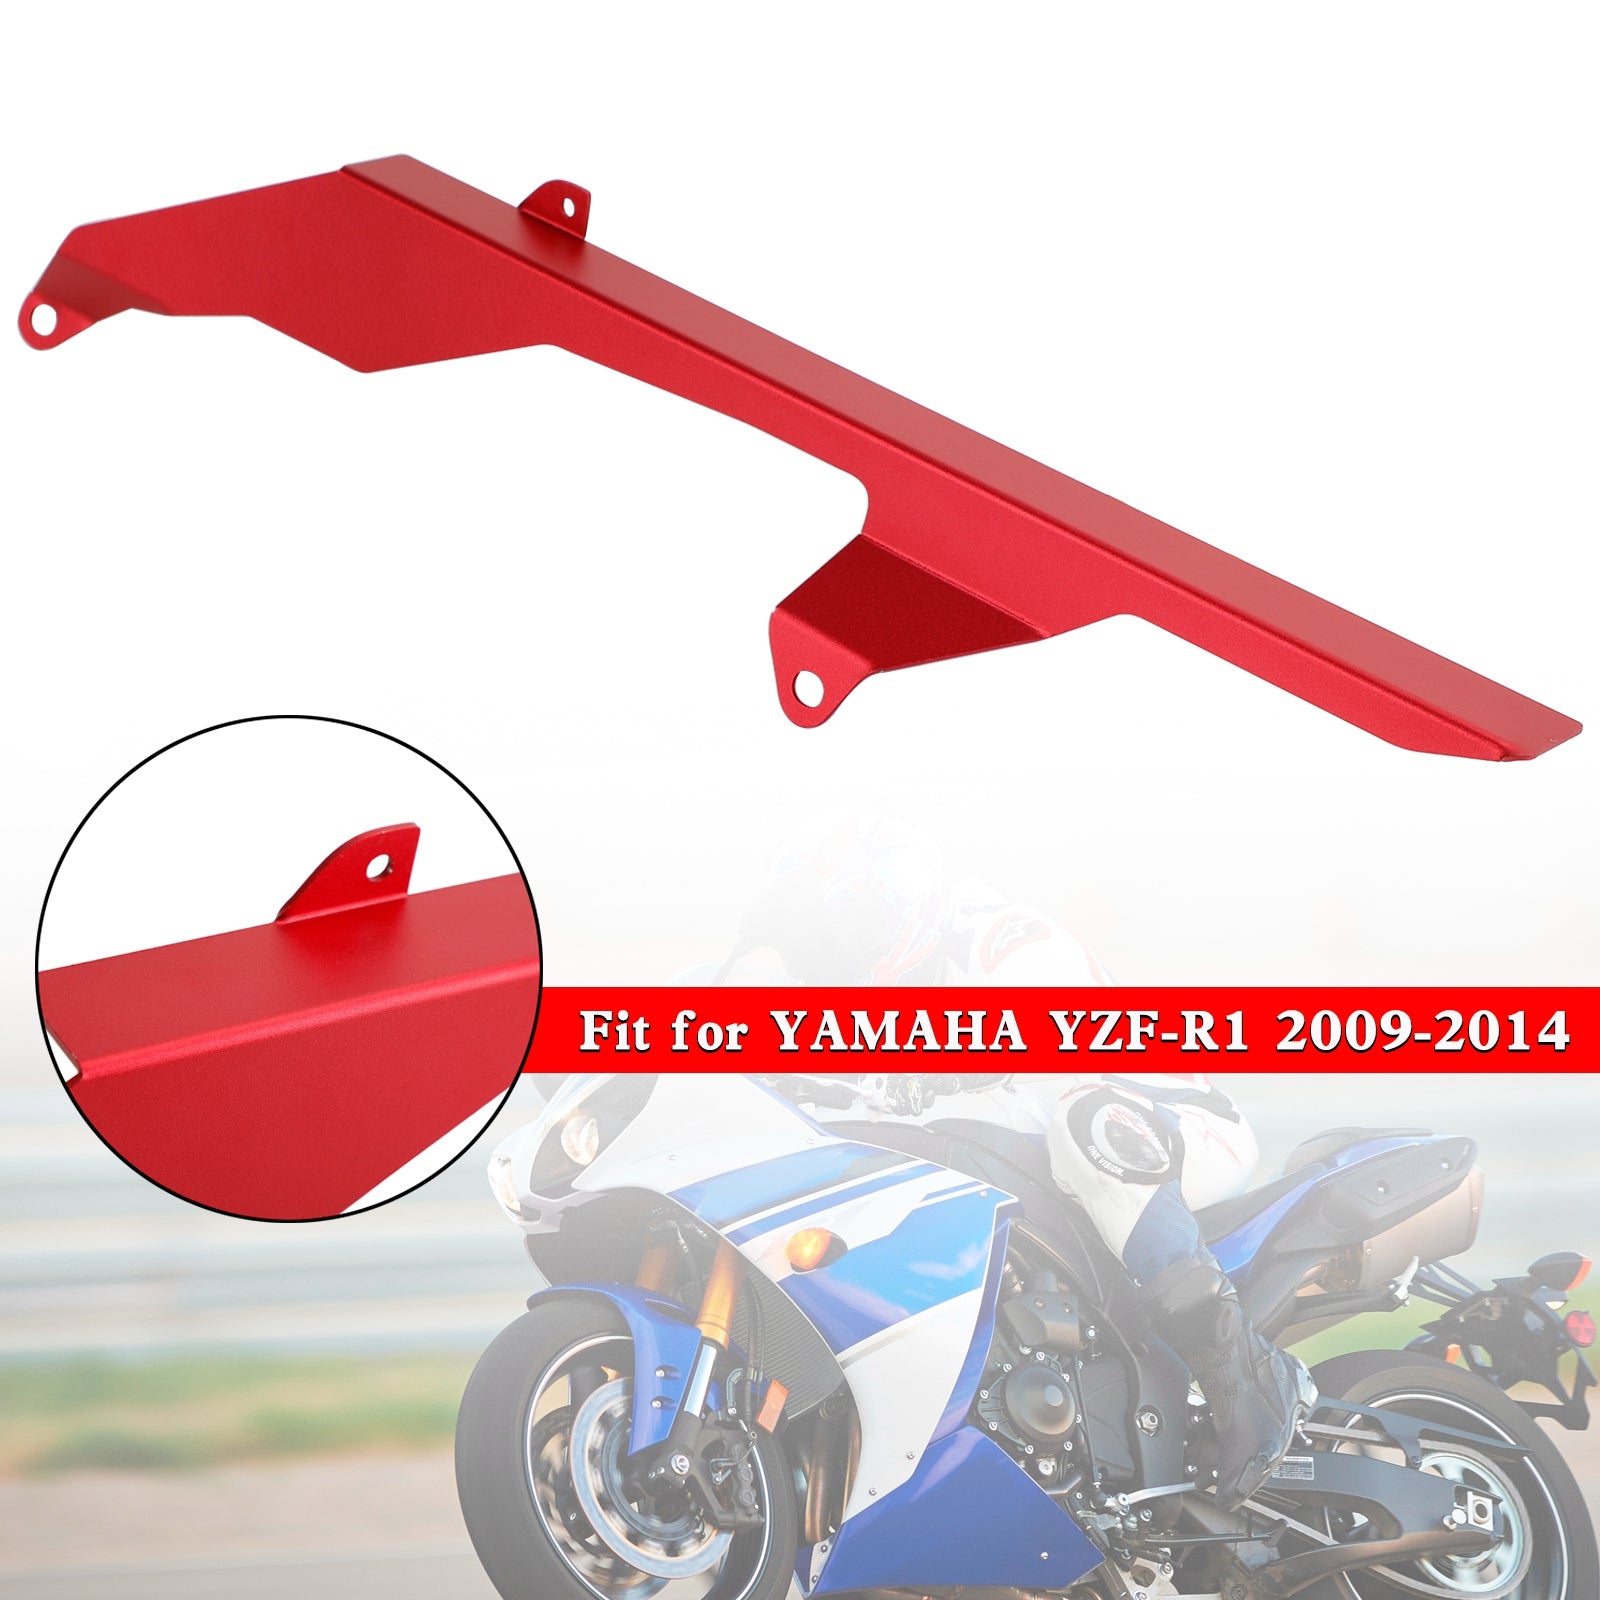 Rear Sprocket Chain Guard Protector Cover For YAMAHA YZF R1 2009-2014 Generic